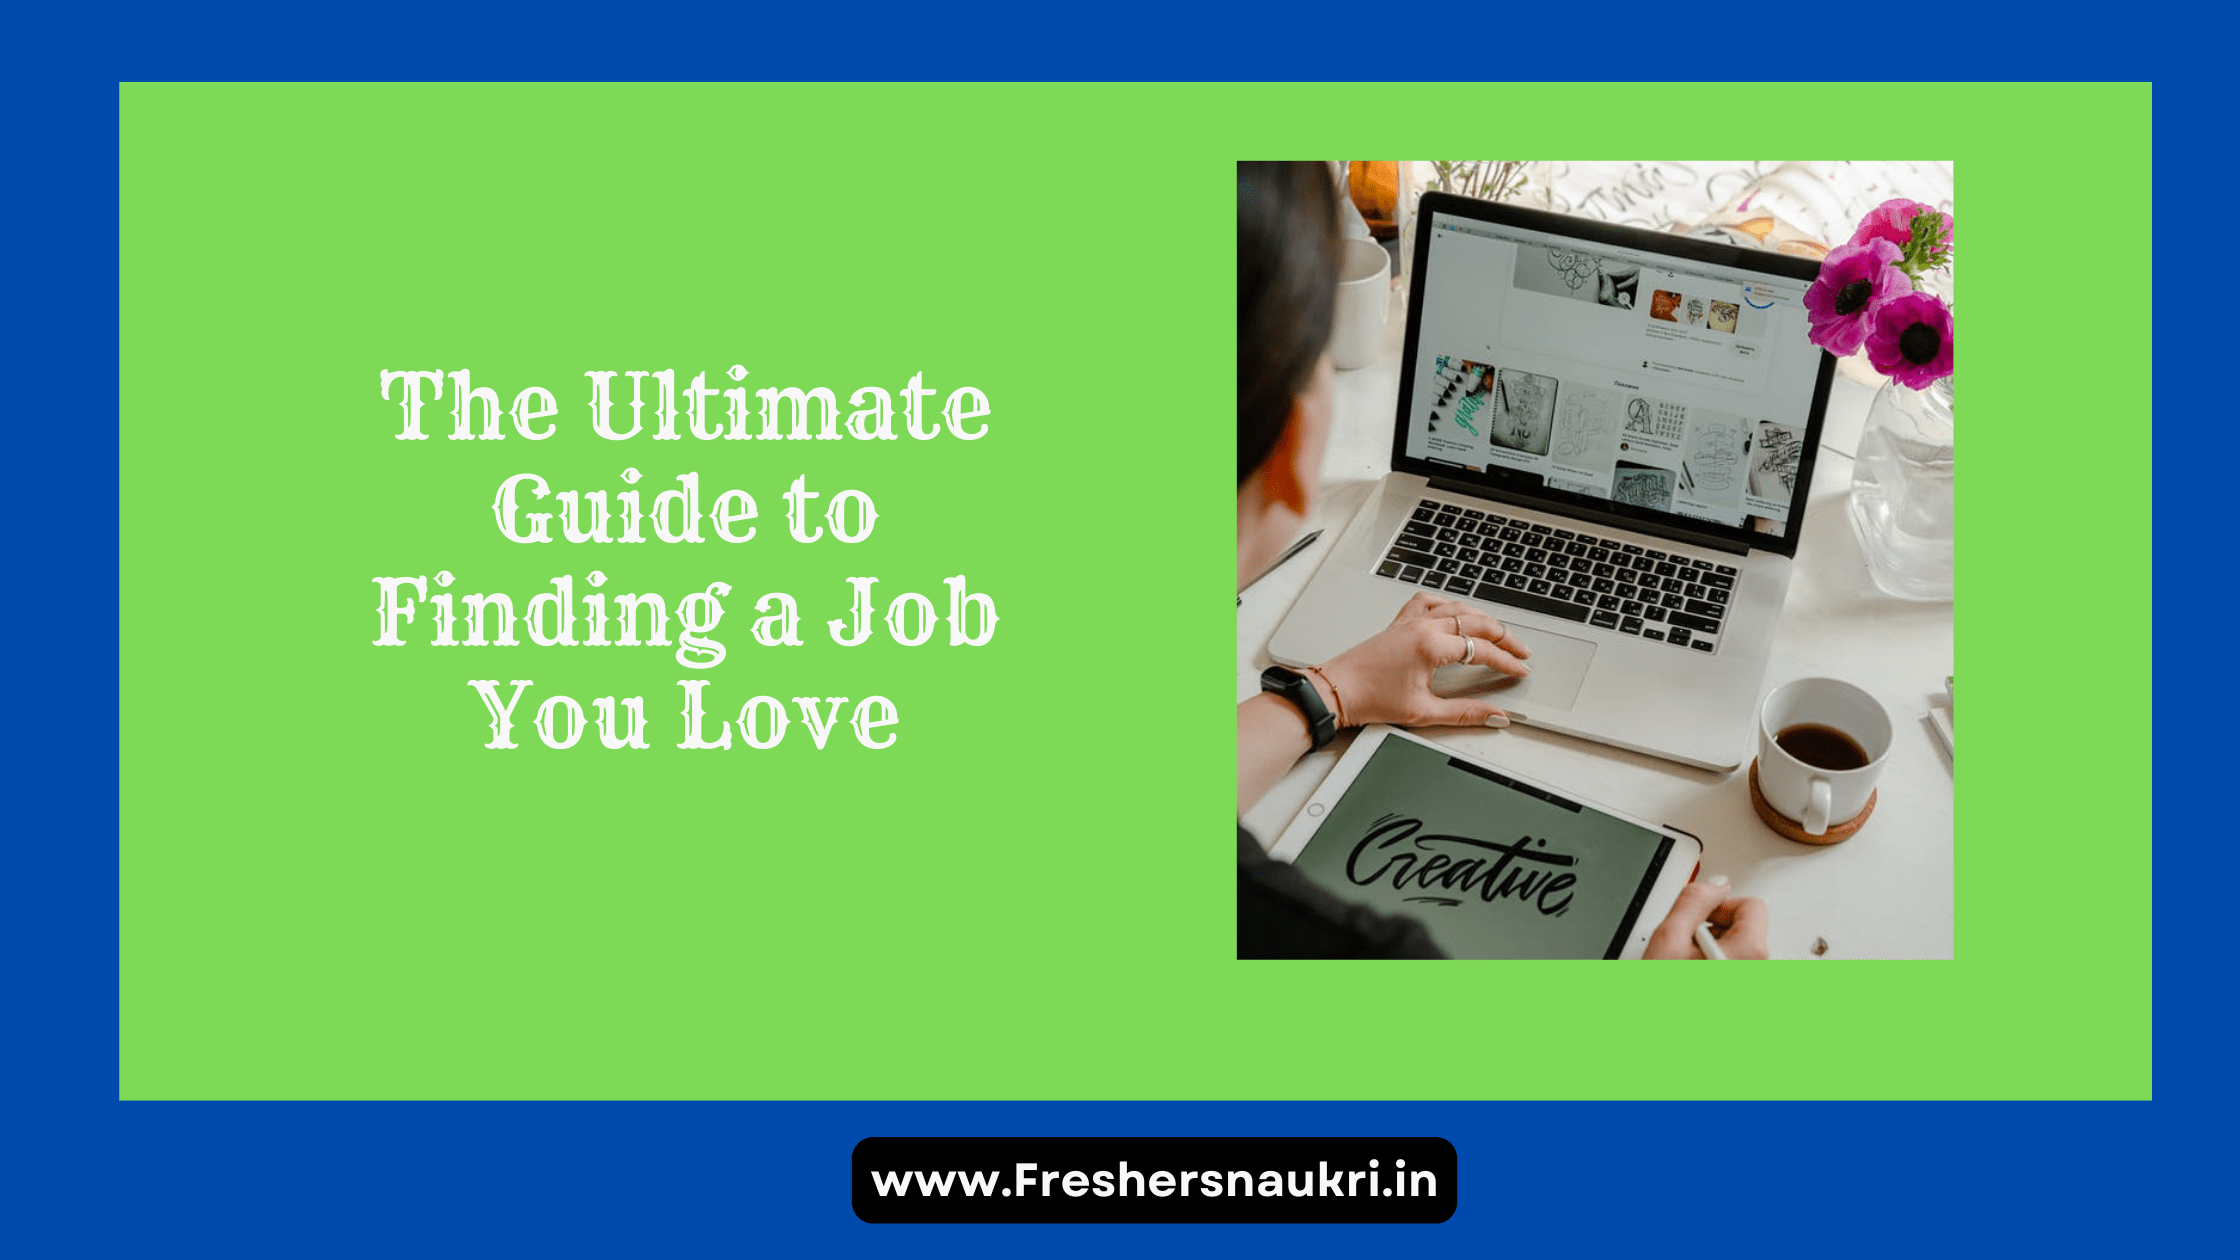 The Ultimate Guide to Finding a Job You Love